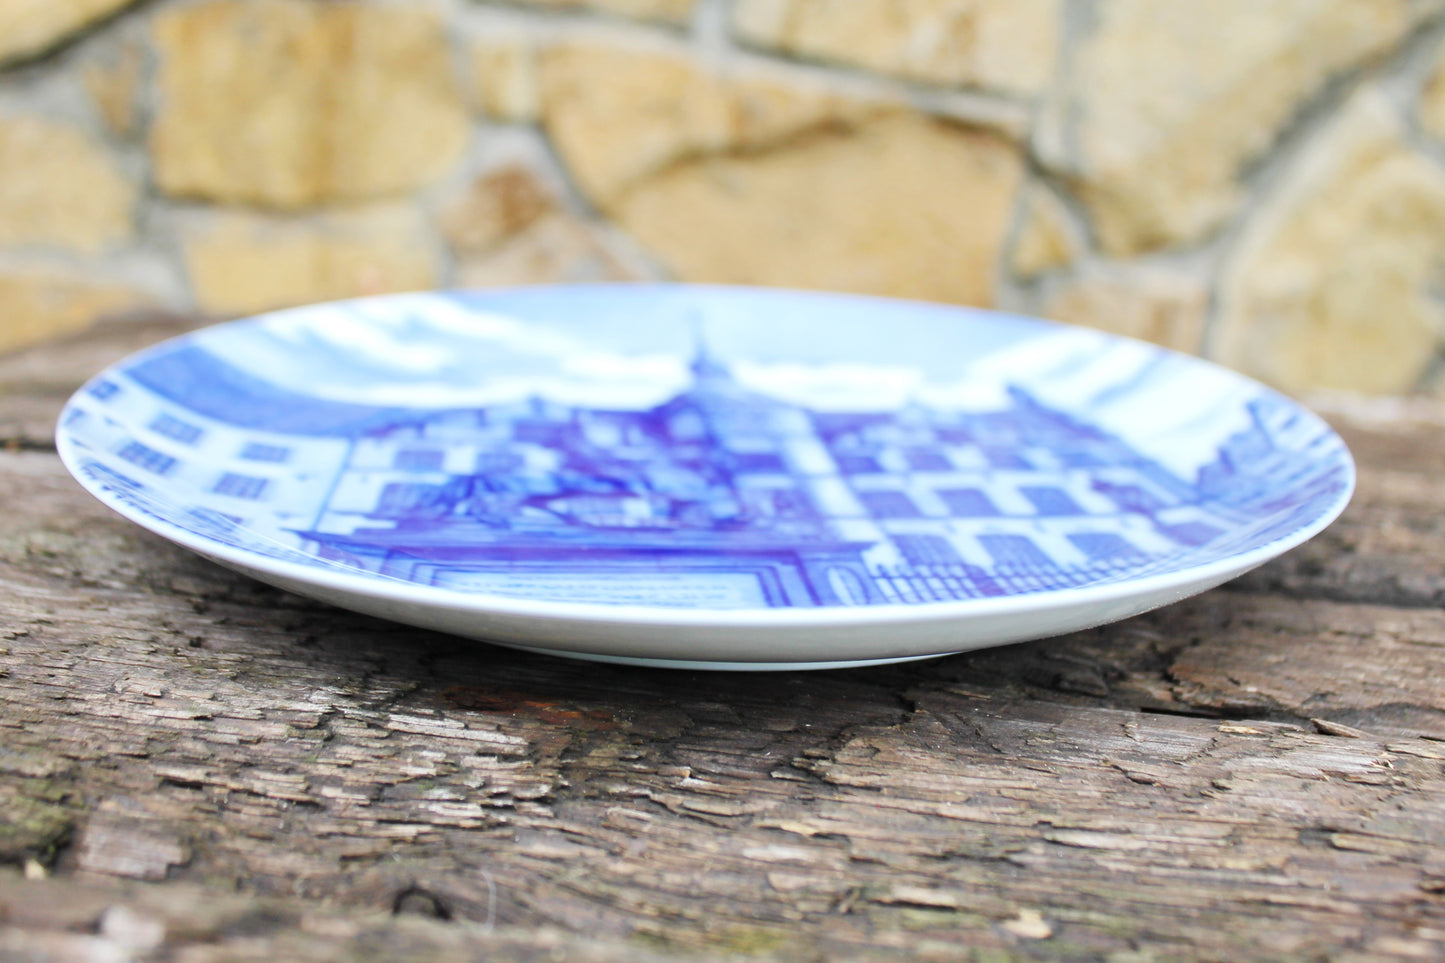 Vintage decorative porcelain wall plate 9.4 inches - Forstenberg Collector's Plate - Dusseldorf - Germany 1970s